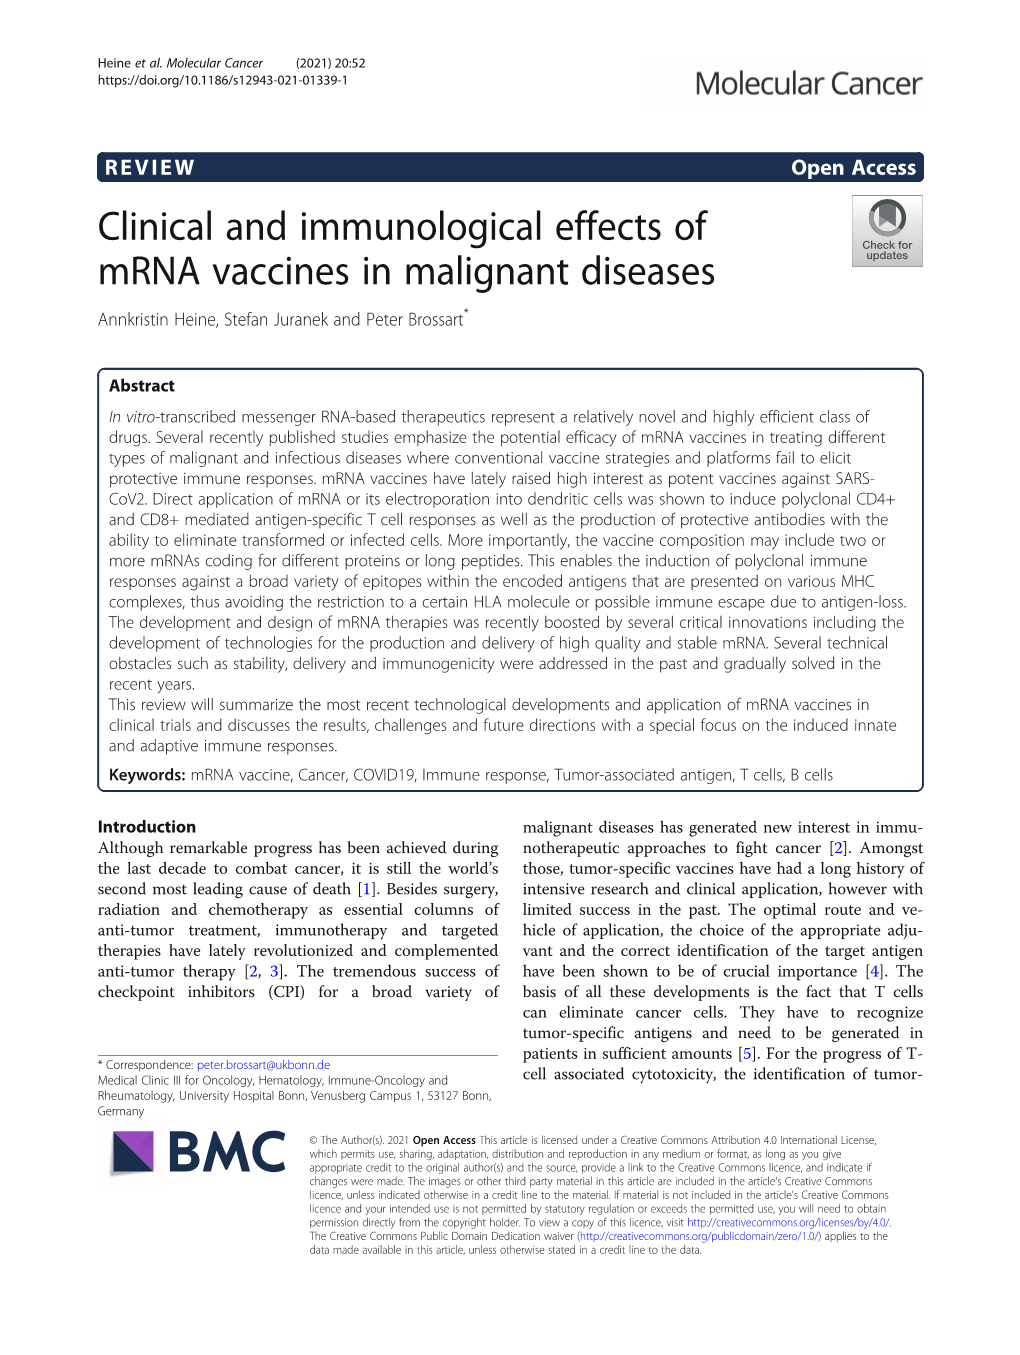 Clinical and Immunological Effects of Mrna Vaccines in Malignant Diseases Annkristin Heine, Stefan Juranek and Peter Brossart*